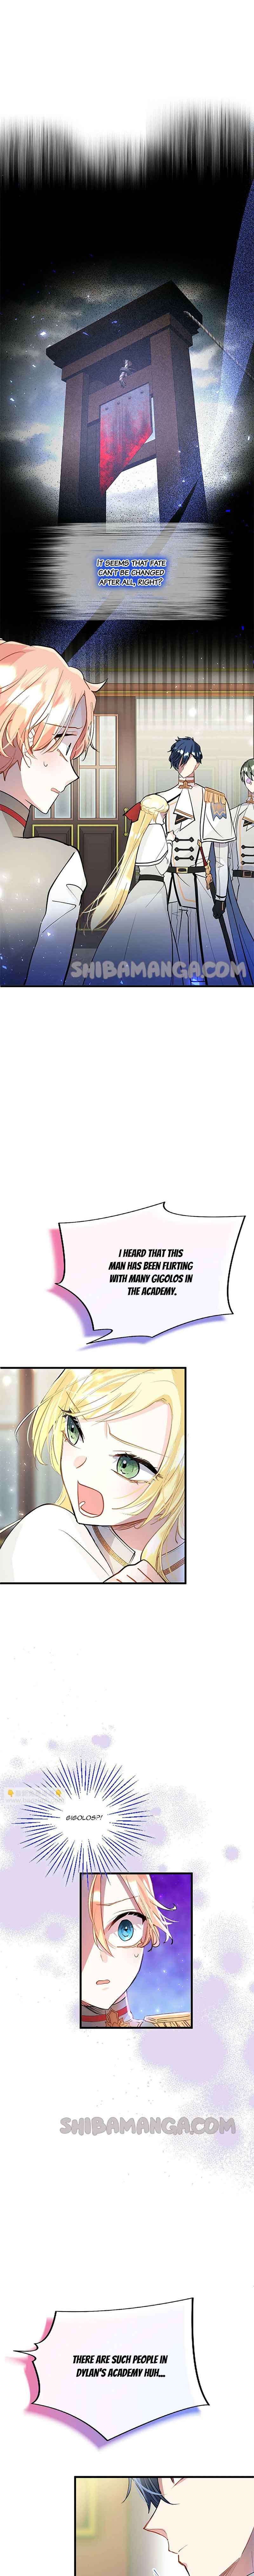 The Reason Why The Twin Lady Crossdresses - 29 page 16-e450c340